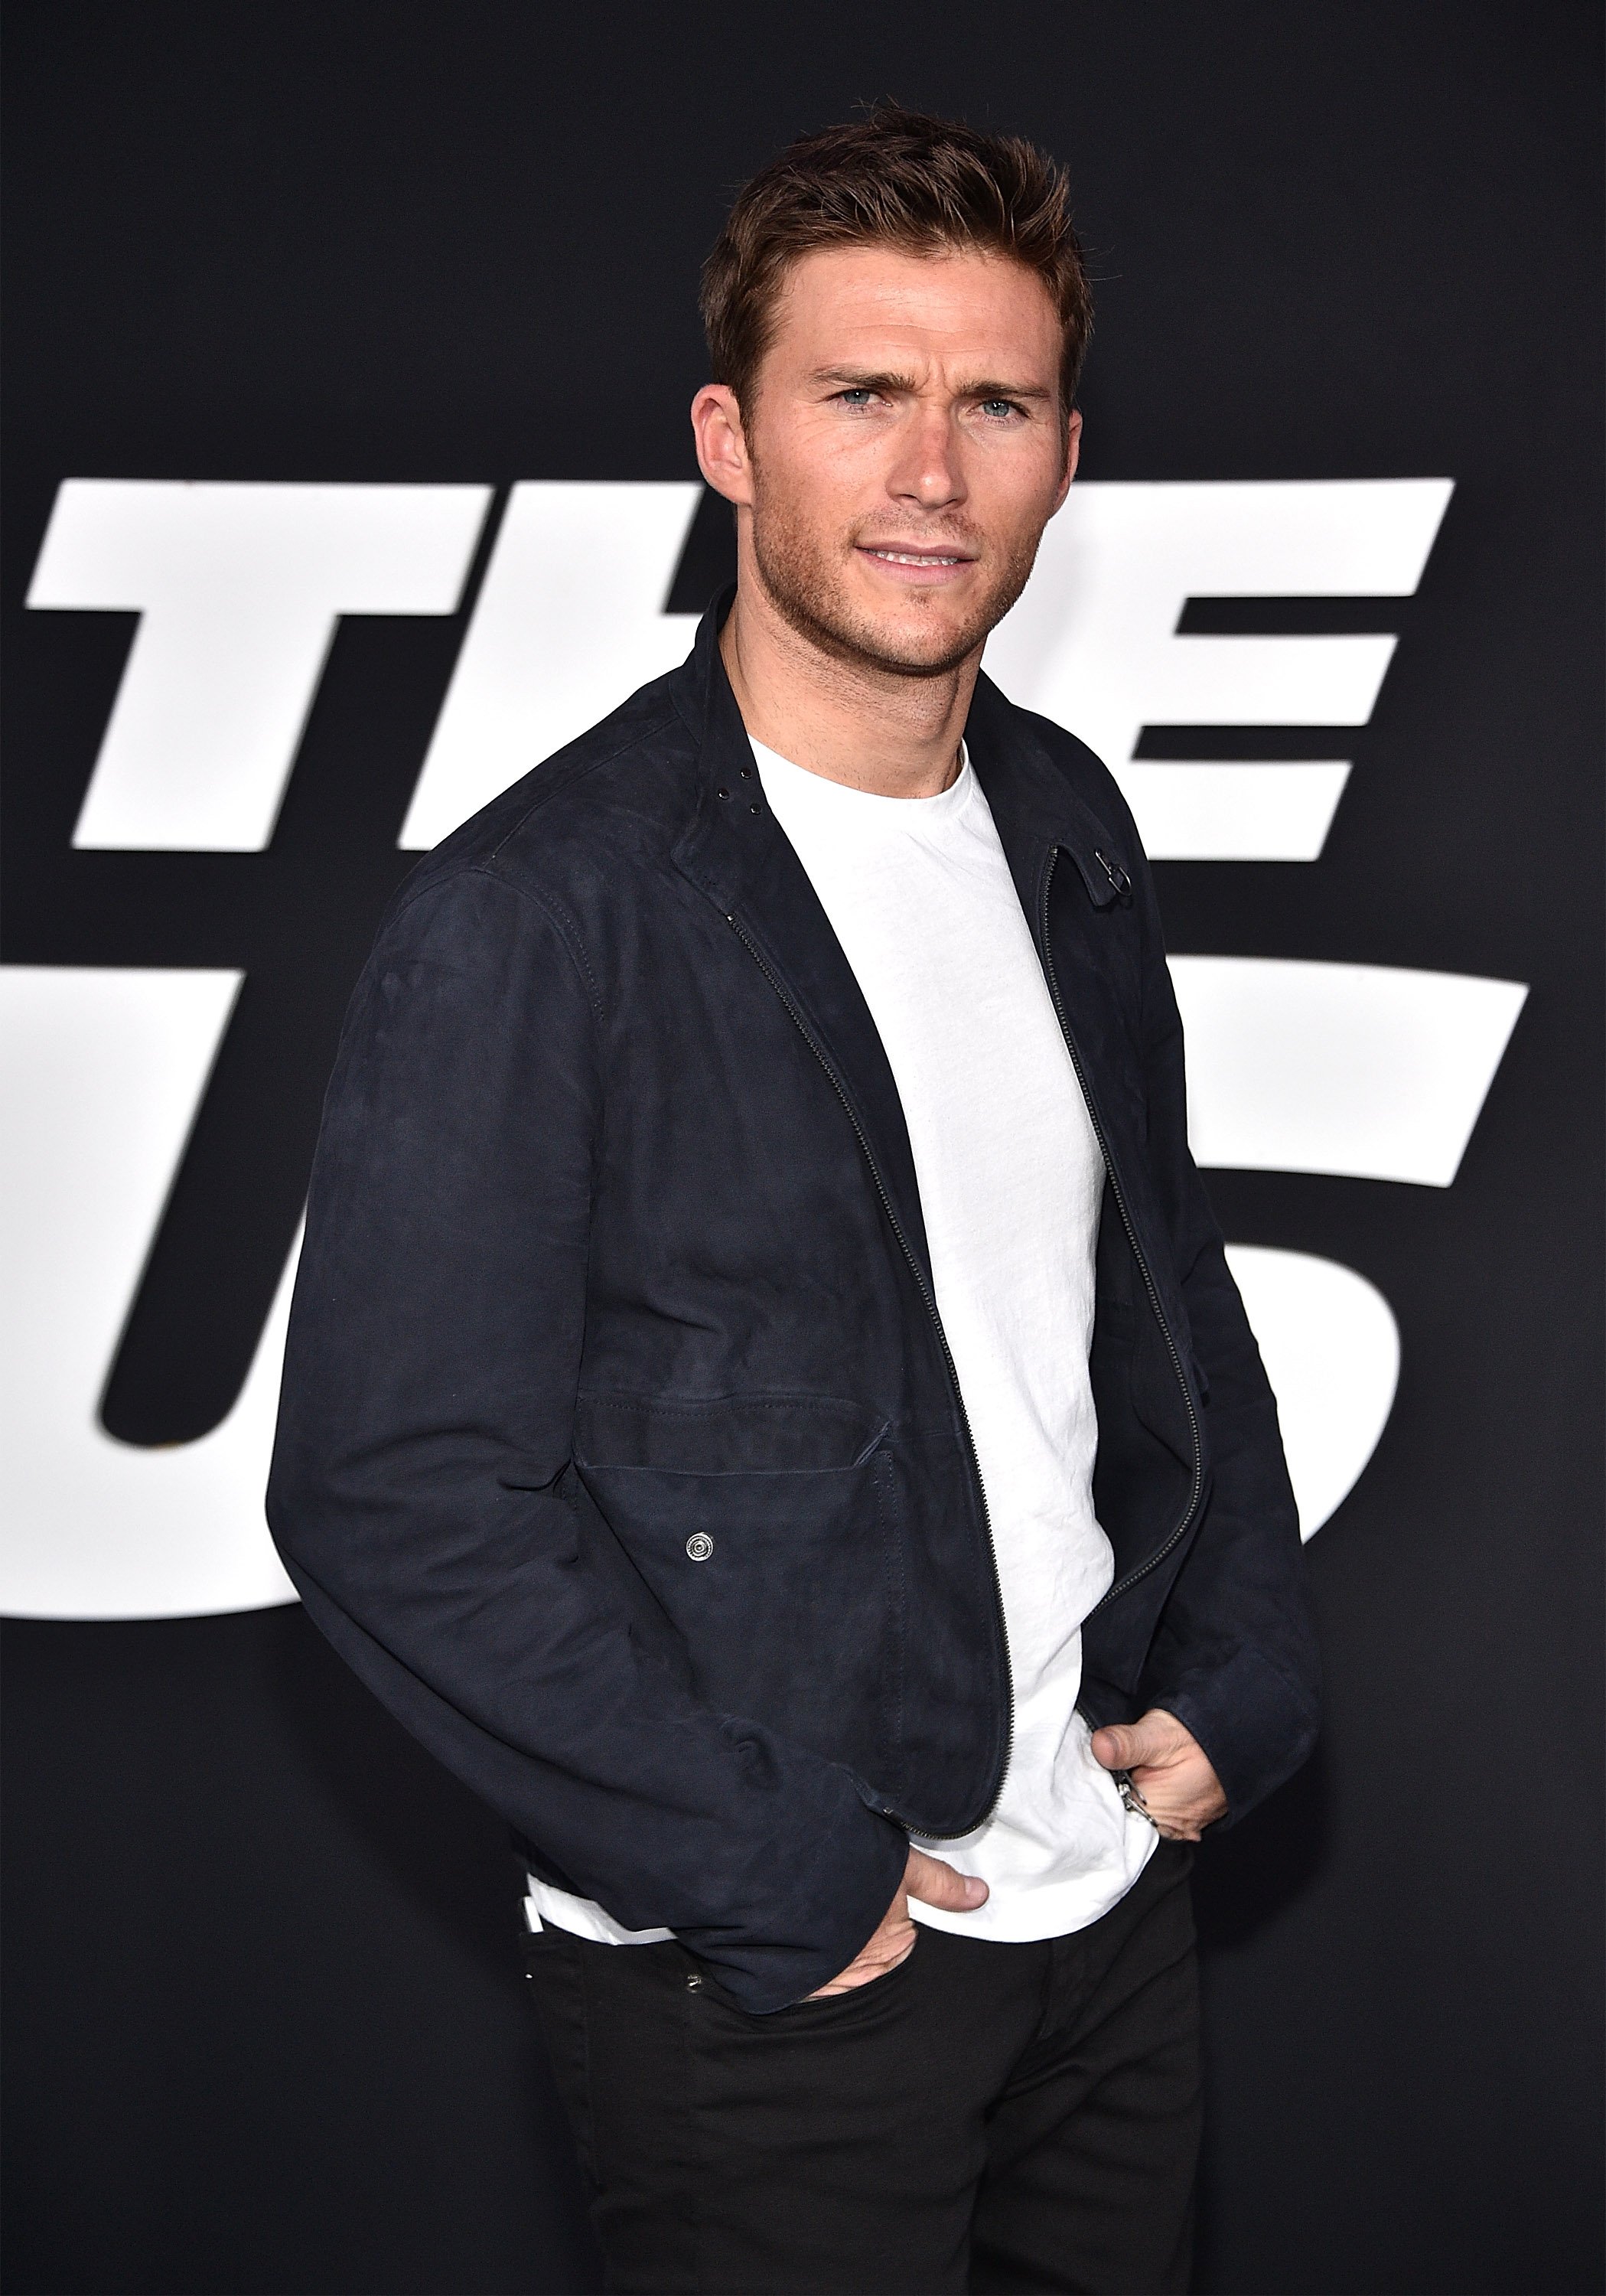 Scott Eastwood attends the premiere of "The Fate of the Furious" in New York City on April 8, 2017 | Photo: Getty Images